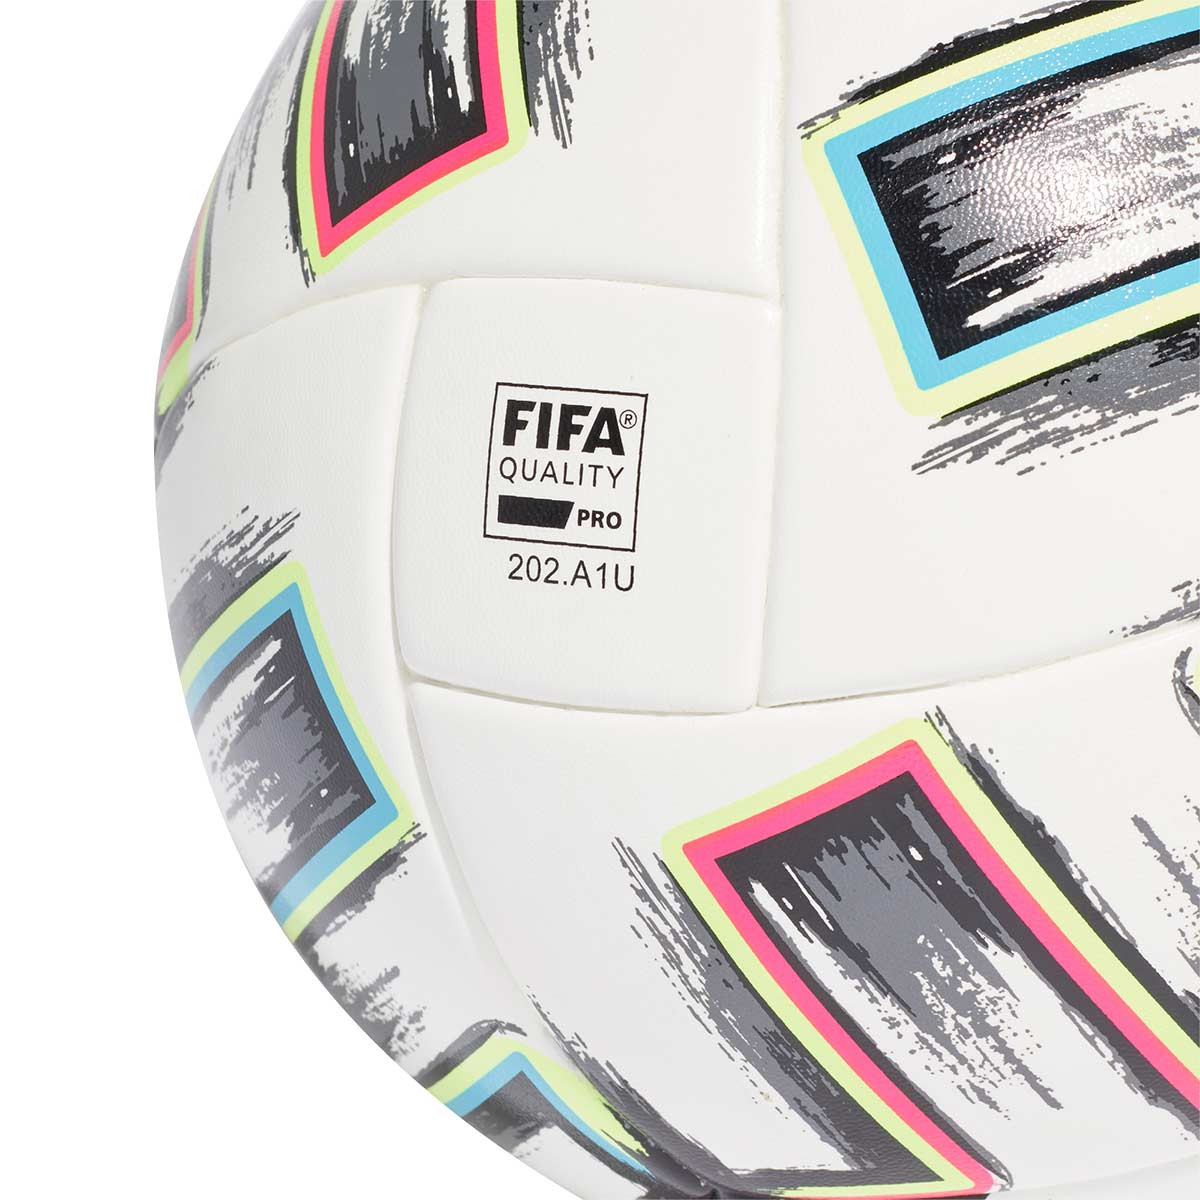 adidas competition ball